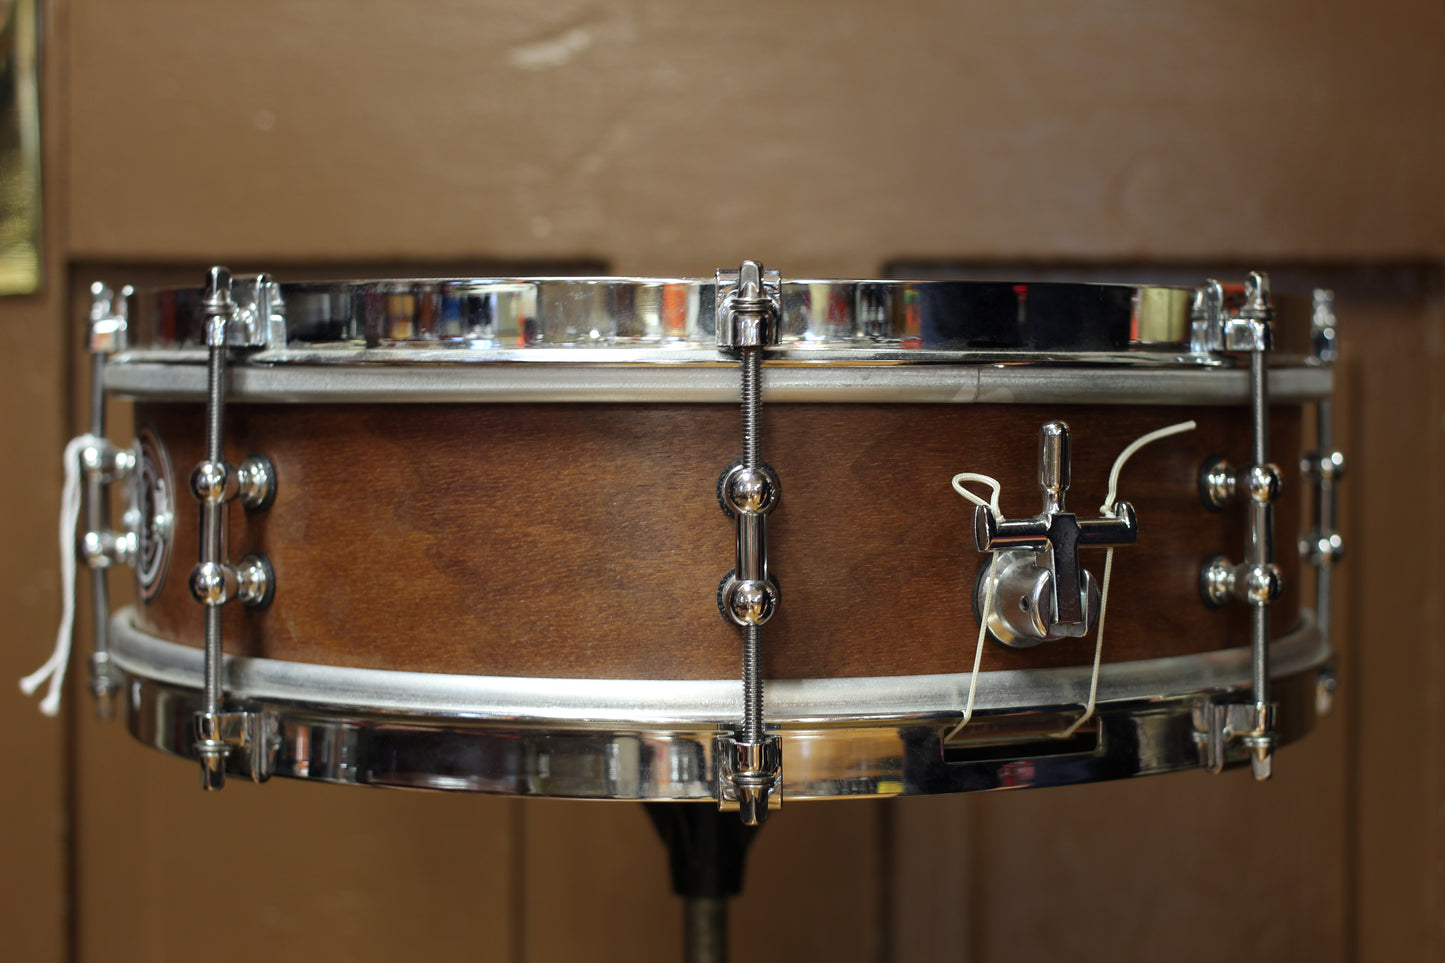 YC Drum Company 4"x14" Snare Drum in Natural Walnut